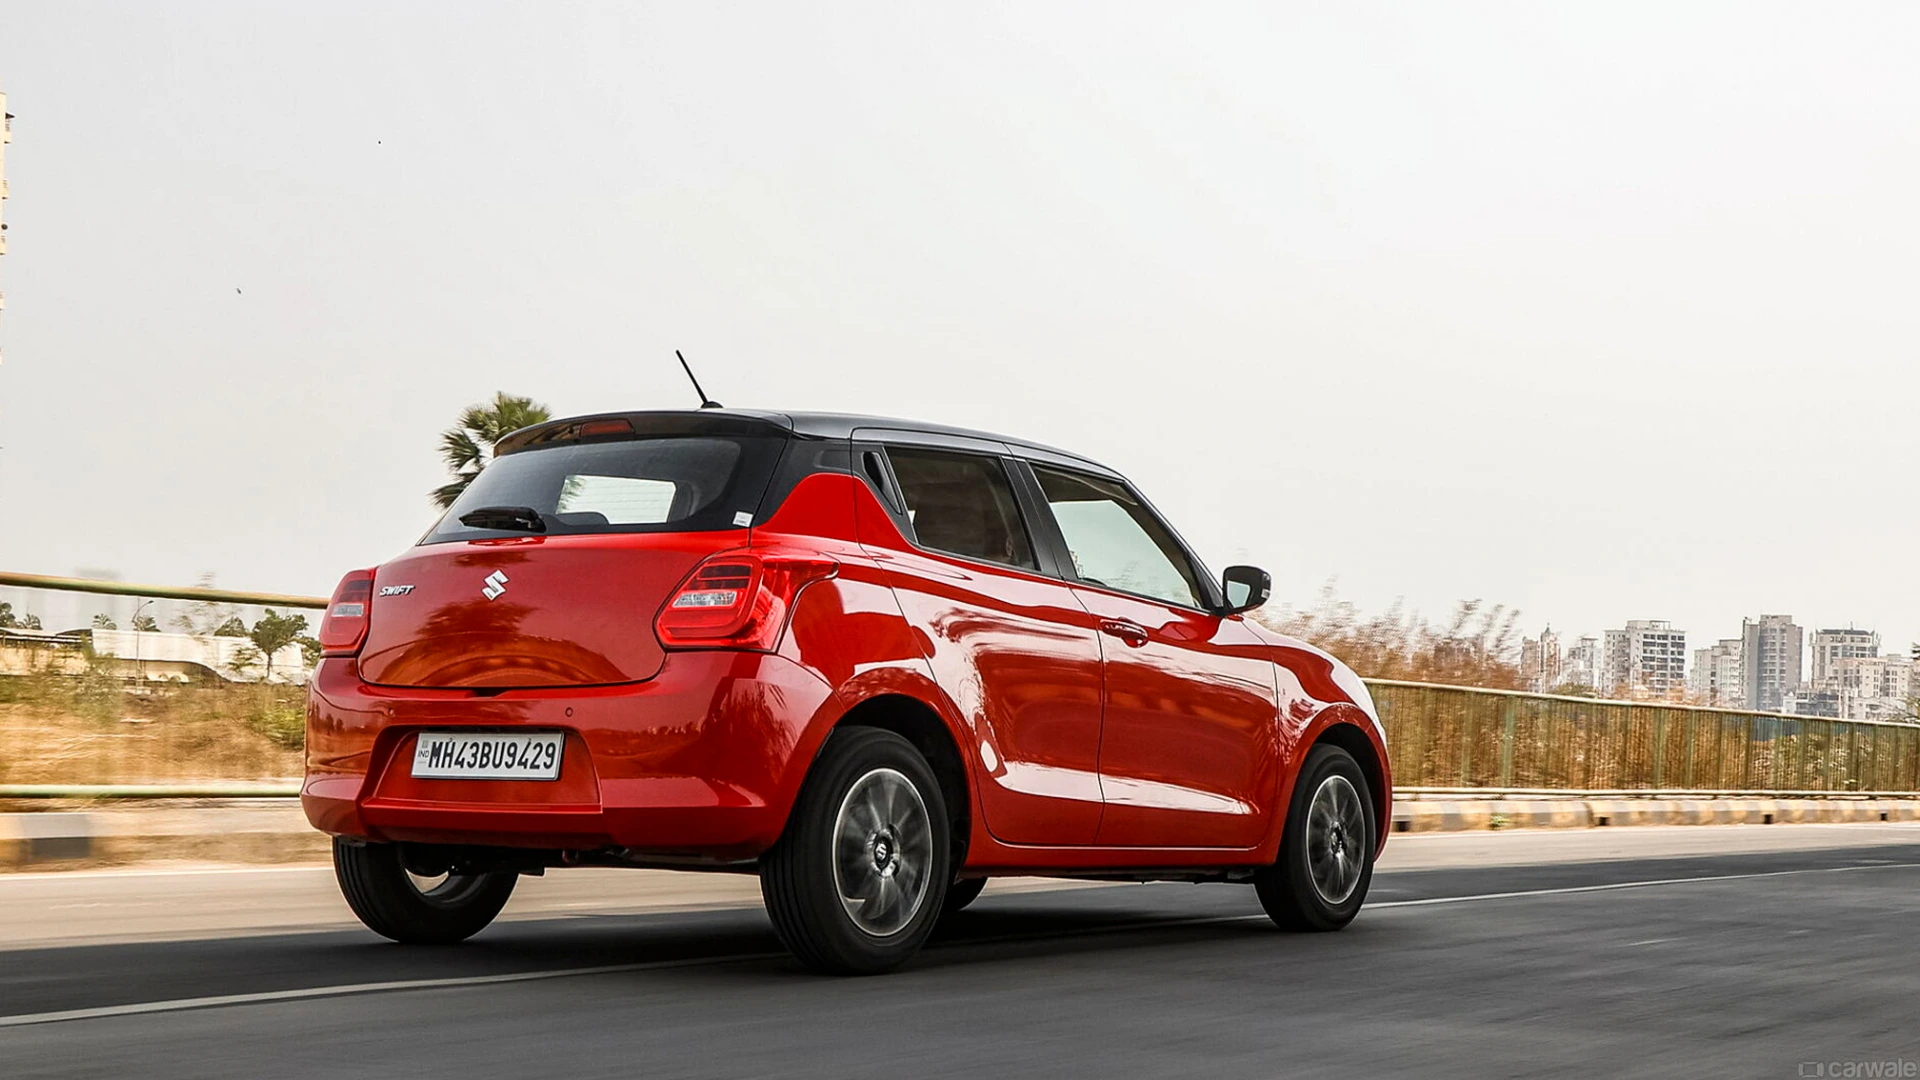 Maruti Swift is getting a discount of up to ₹ 65,000